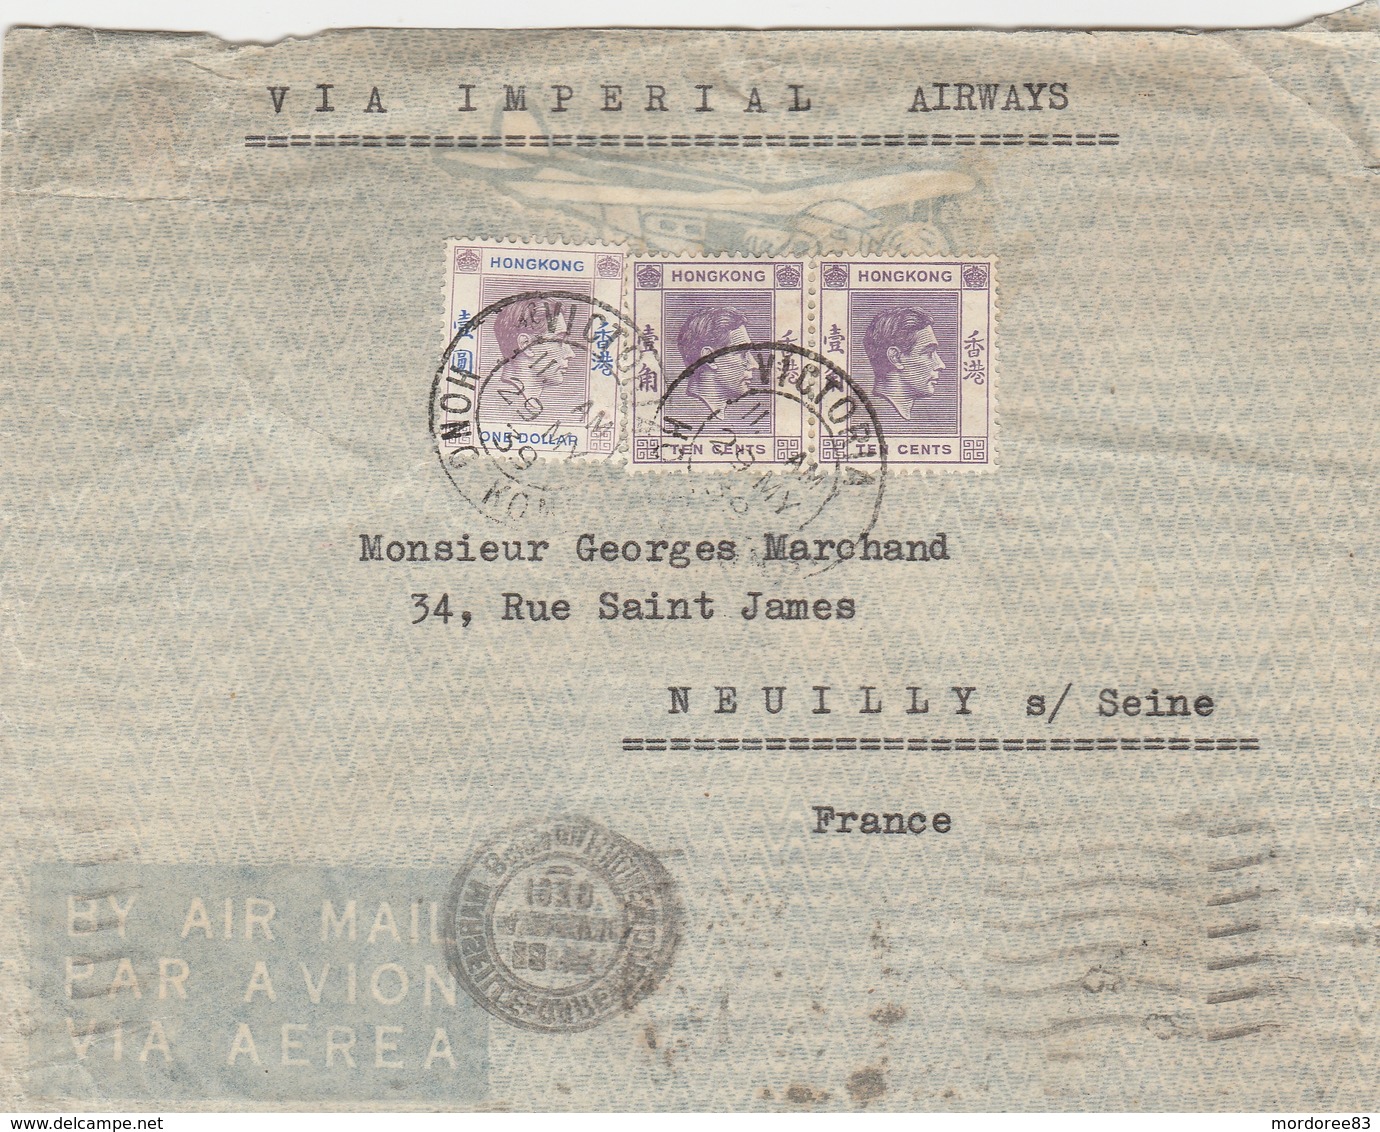 HONG KONG GEORGE VI 1 DOLLAR + PAIRE 10 C YT 153+145 SUR LETTRE VIA IMPERIAL AIRWAYS VICTORIA 29/5/39 FRANCE NEUILLY S/S - Lettres & Documents